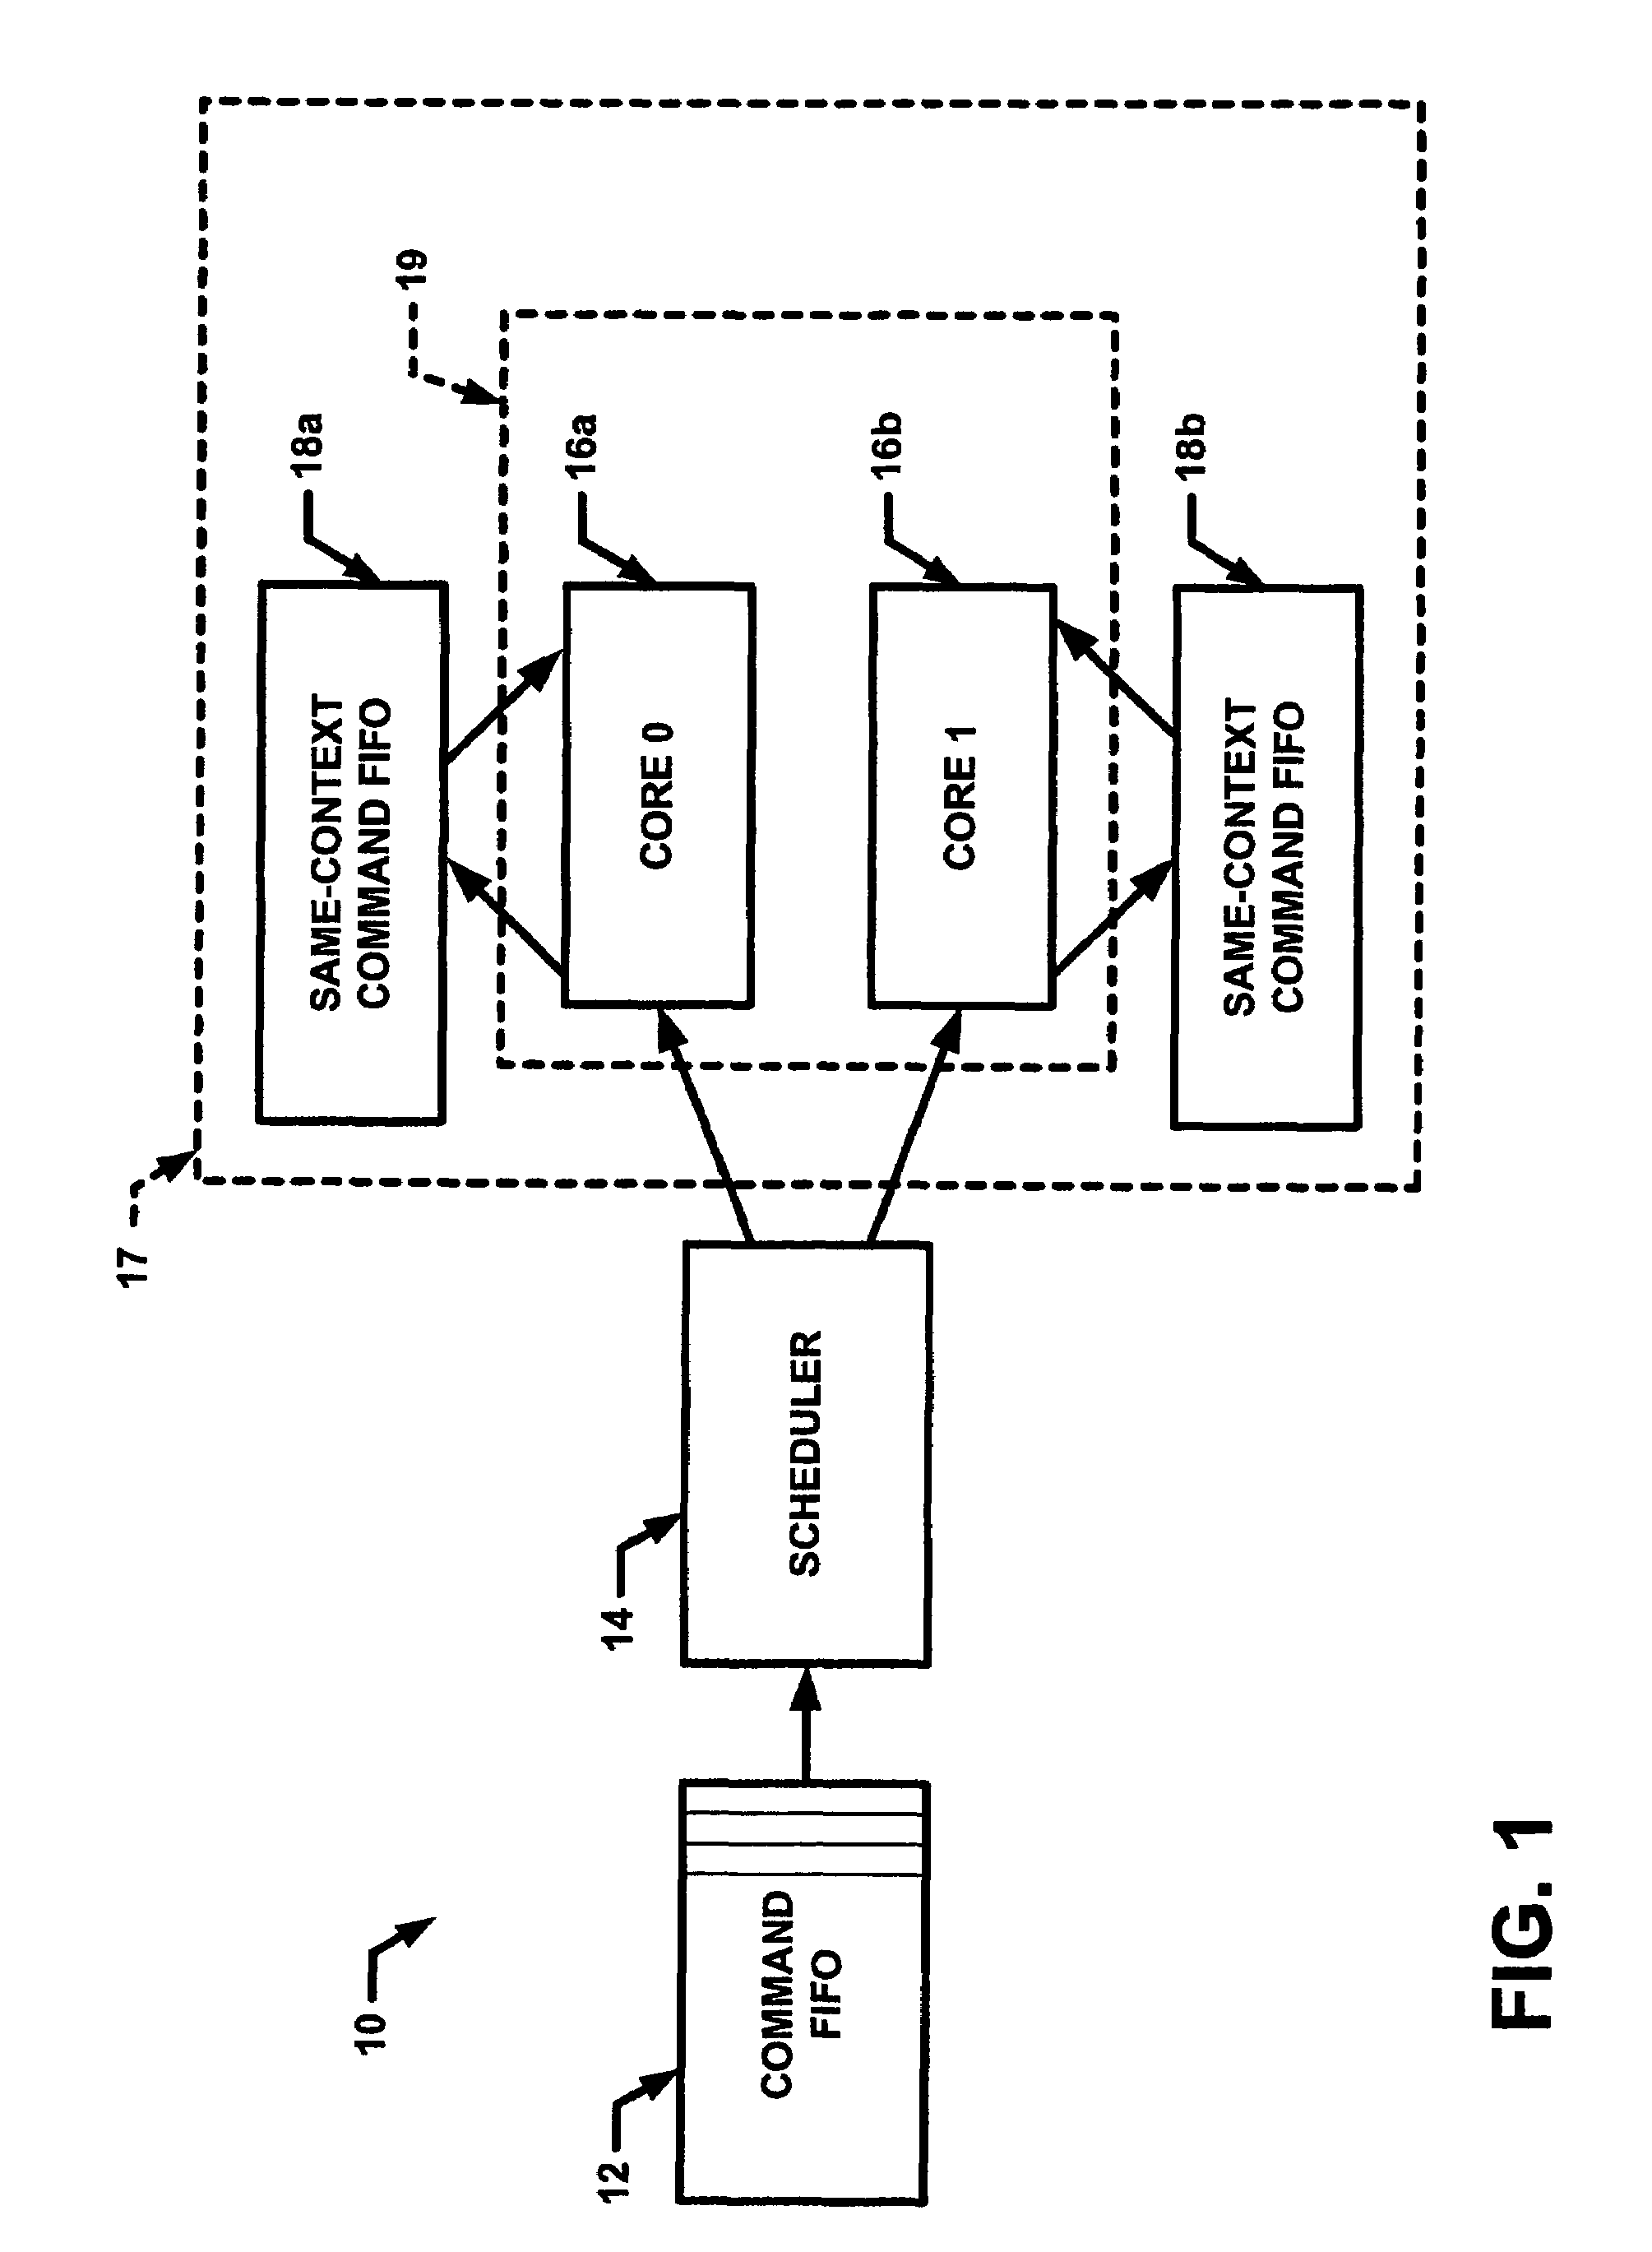 Method and apparatus for scheduling the processing of commands for execution by cryptographic algorithm cores in a programmable network processor